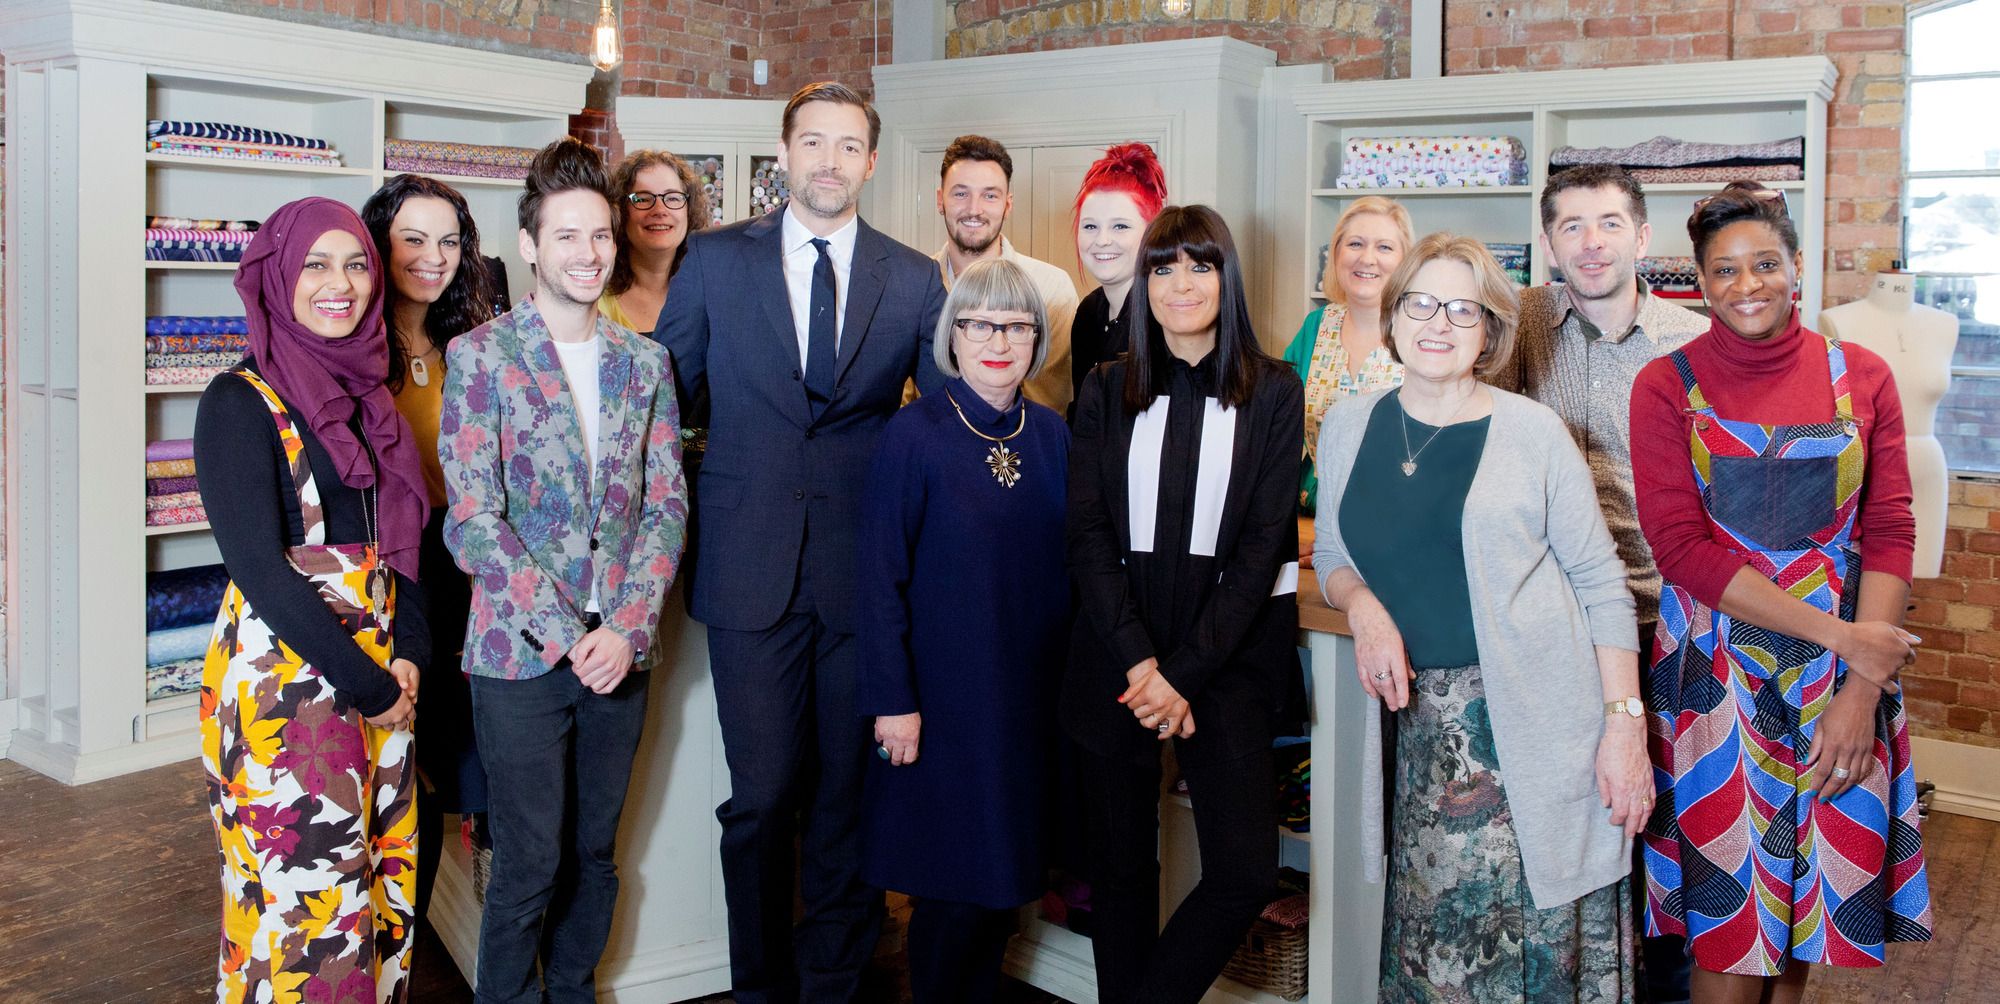 Meet the new Sewing Bees 2016! - Sewing Blog - Sew Magazine